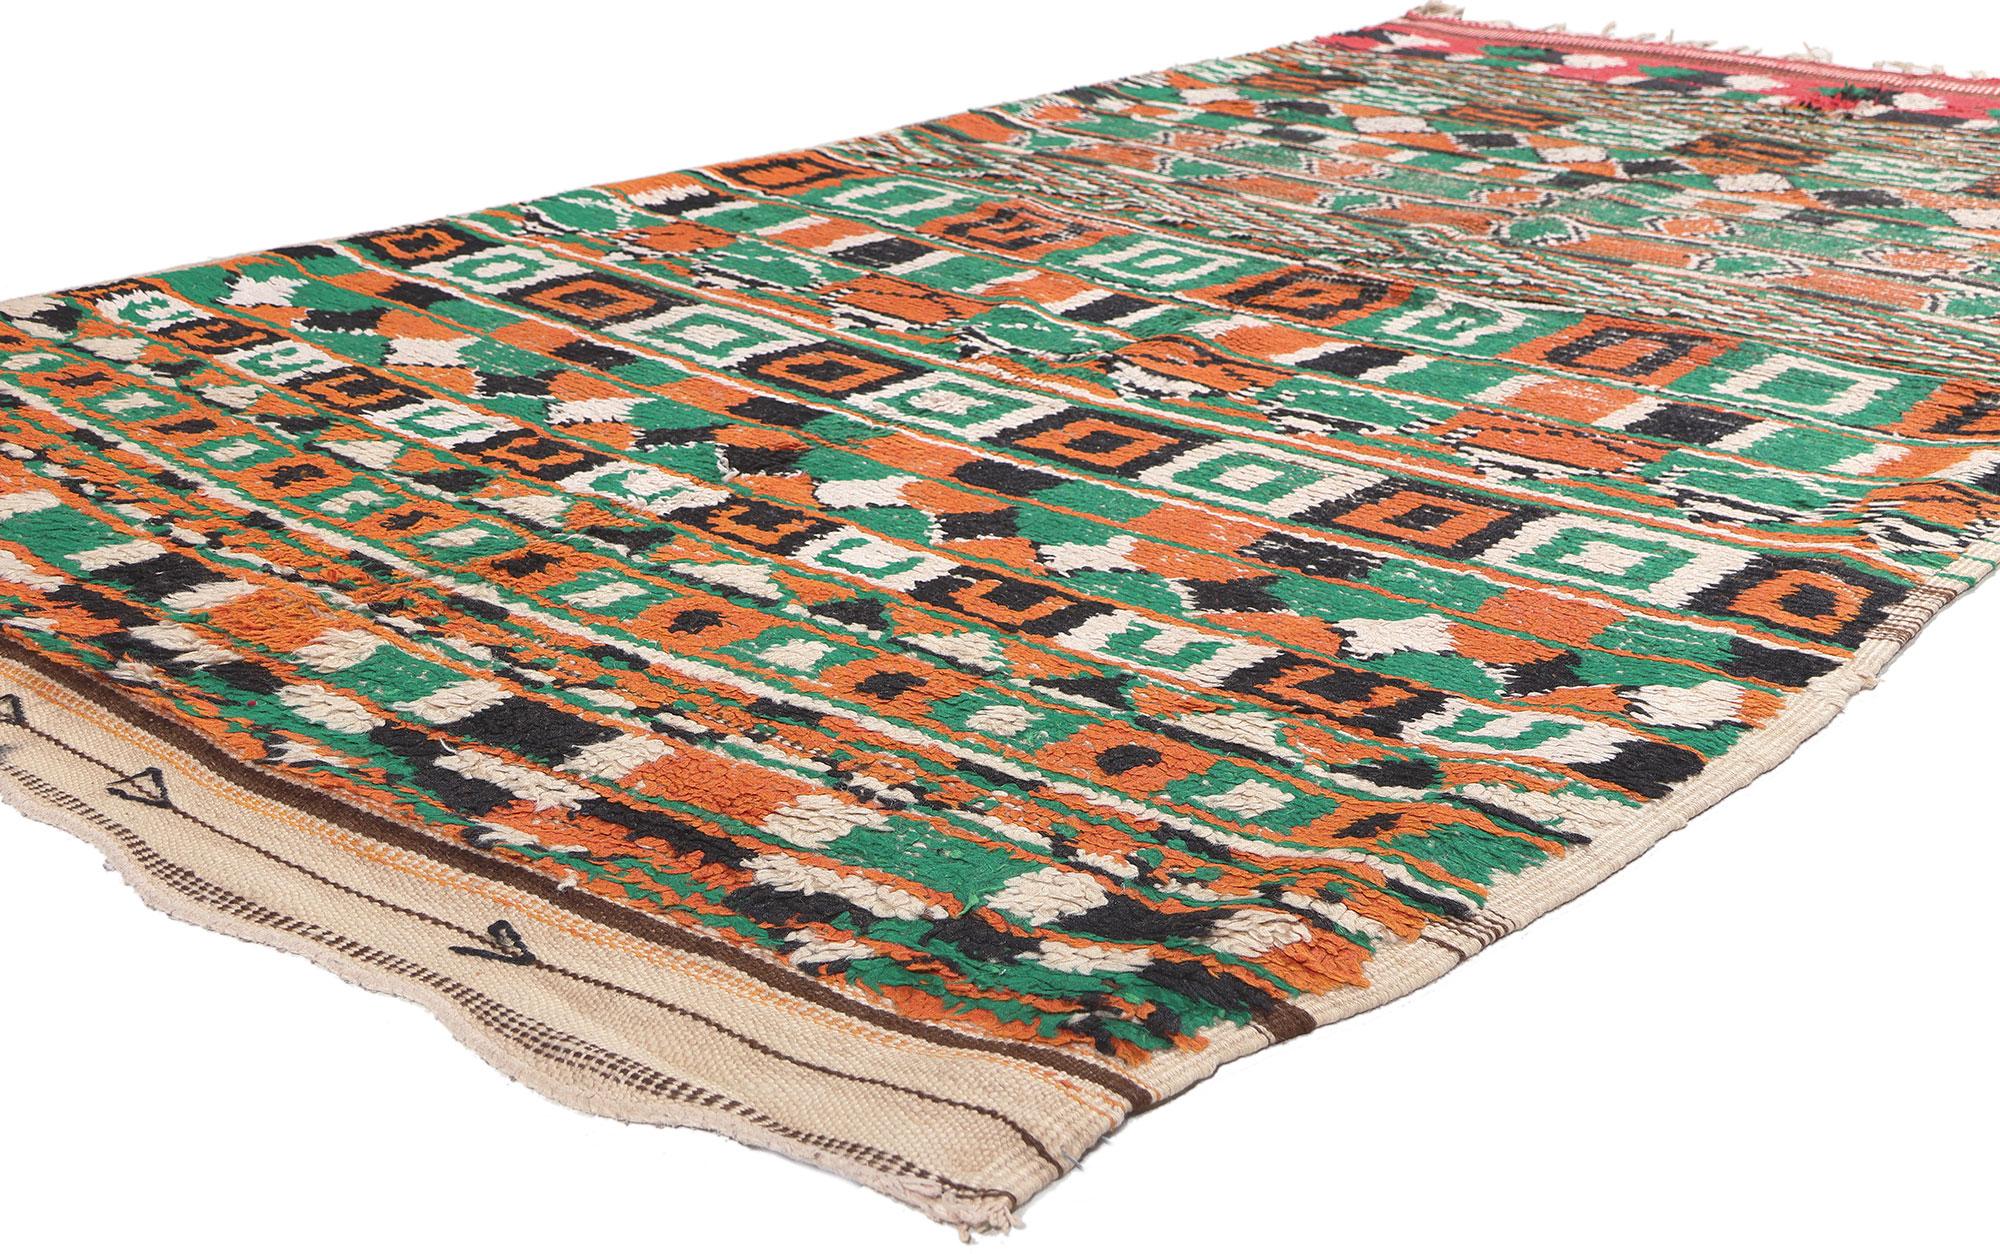 20059 Vintage Boujad Moroccan Rug, 04'08 x 08'04. Step into the dynamic fusion of Bauhaus style and nomadic charm embodied in this hand-knotted wool vintage Moroccan rug. A harmonious blend of visual complexity and lively earth-tone colors defines